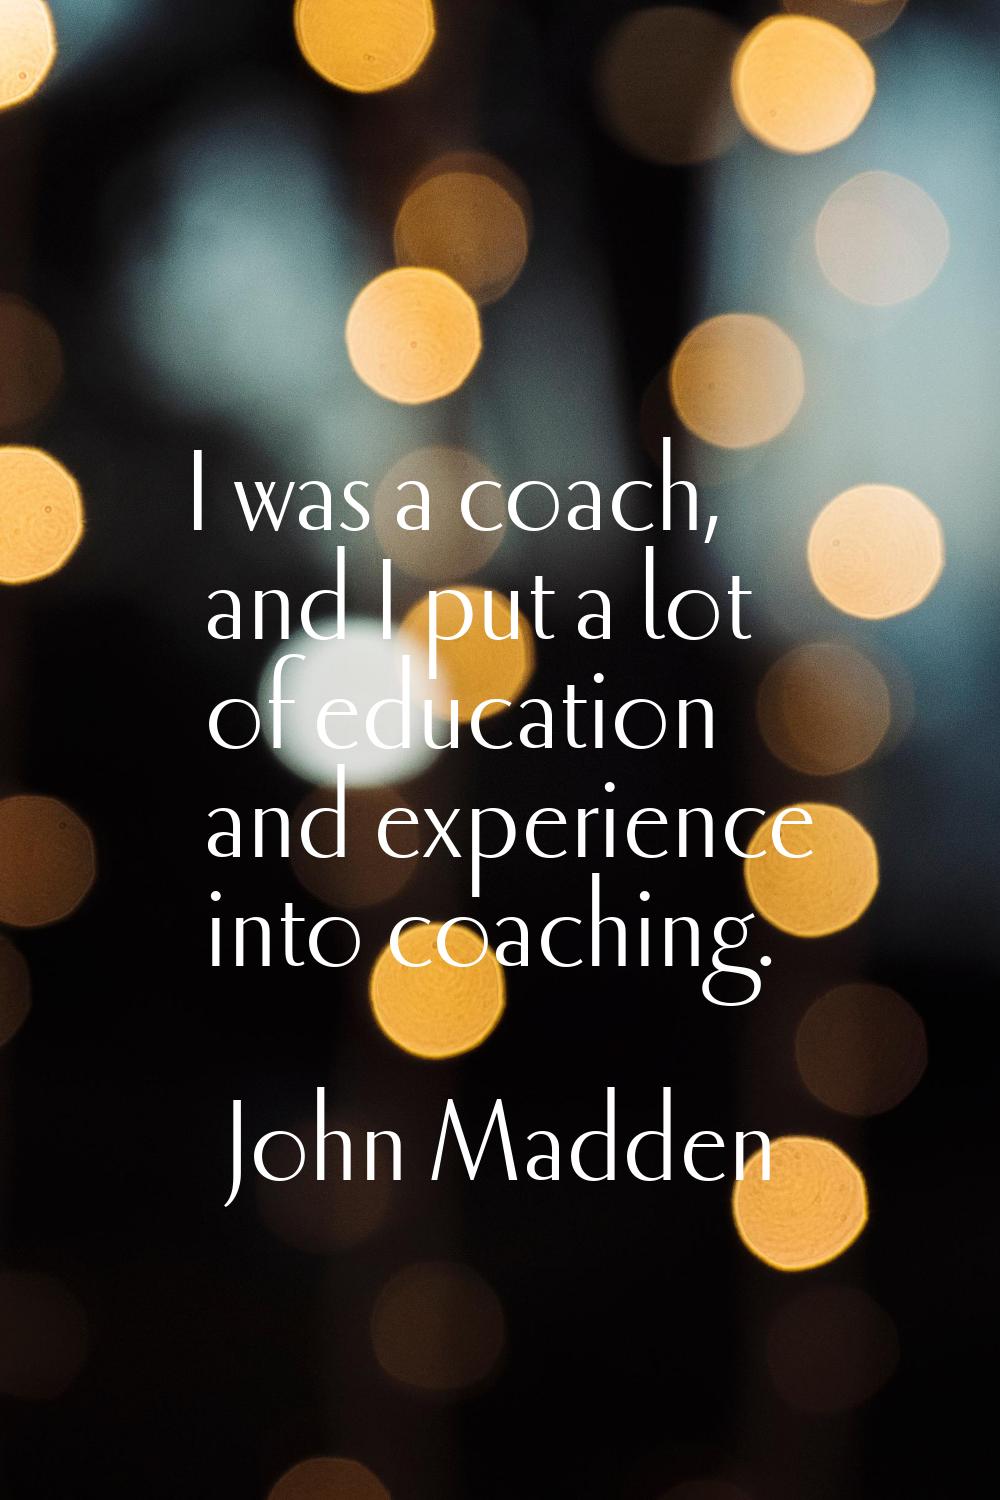 I was a coach, and I put a lot of education and experience into coaching.